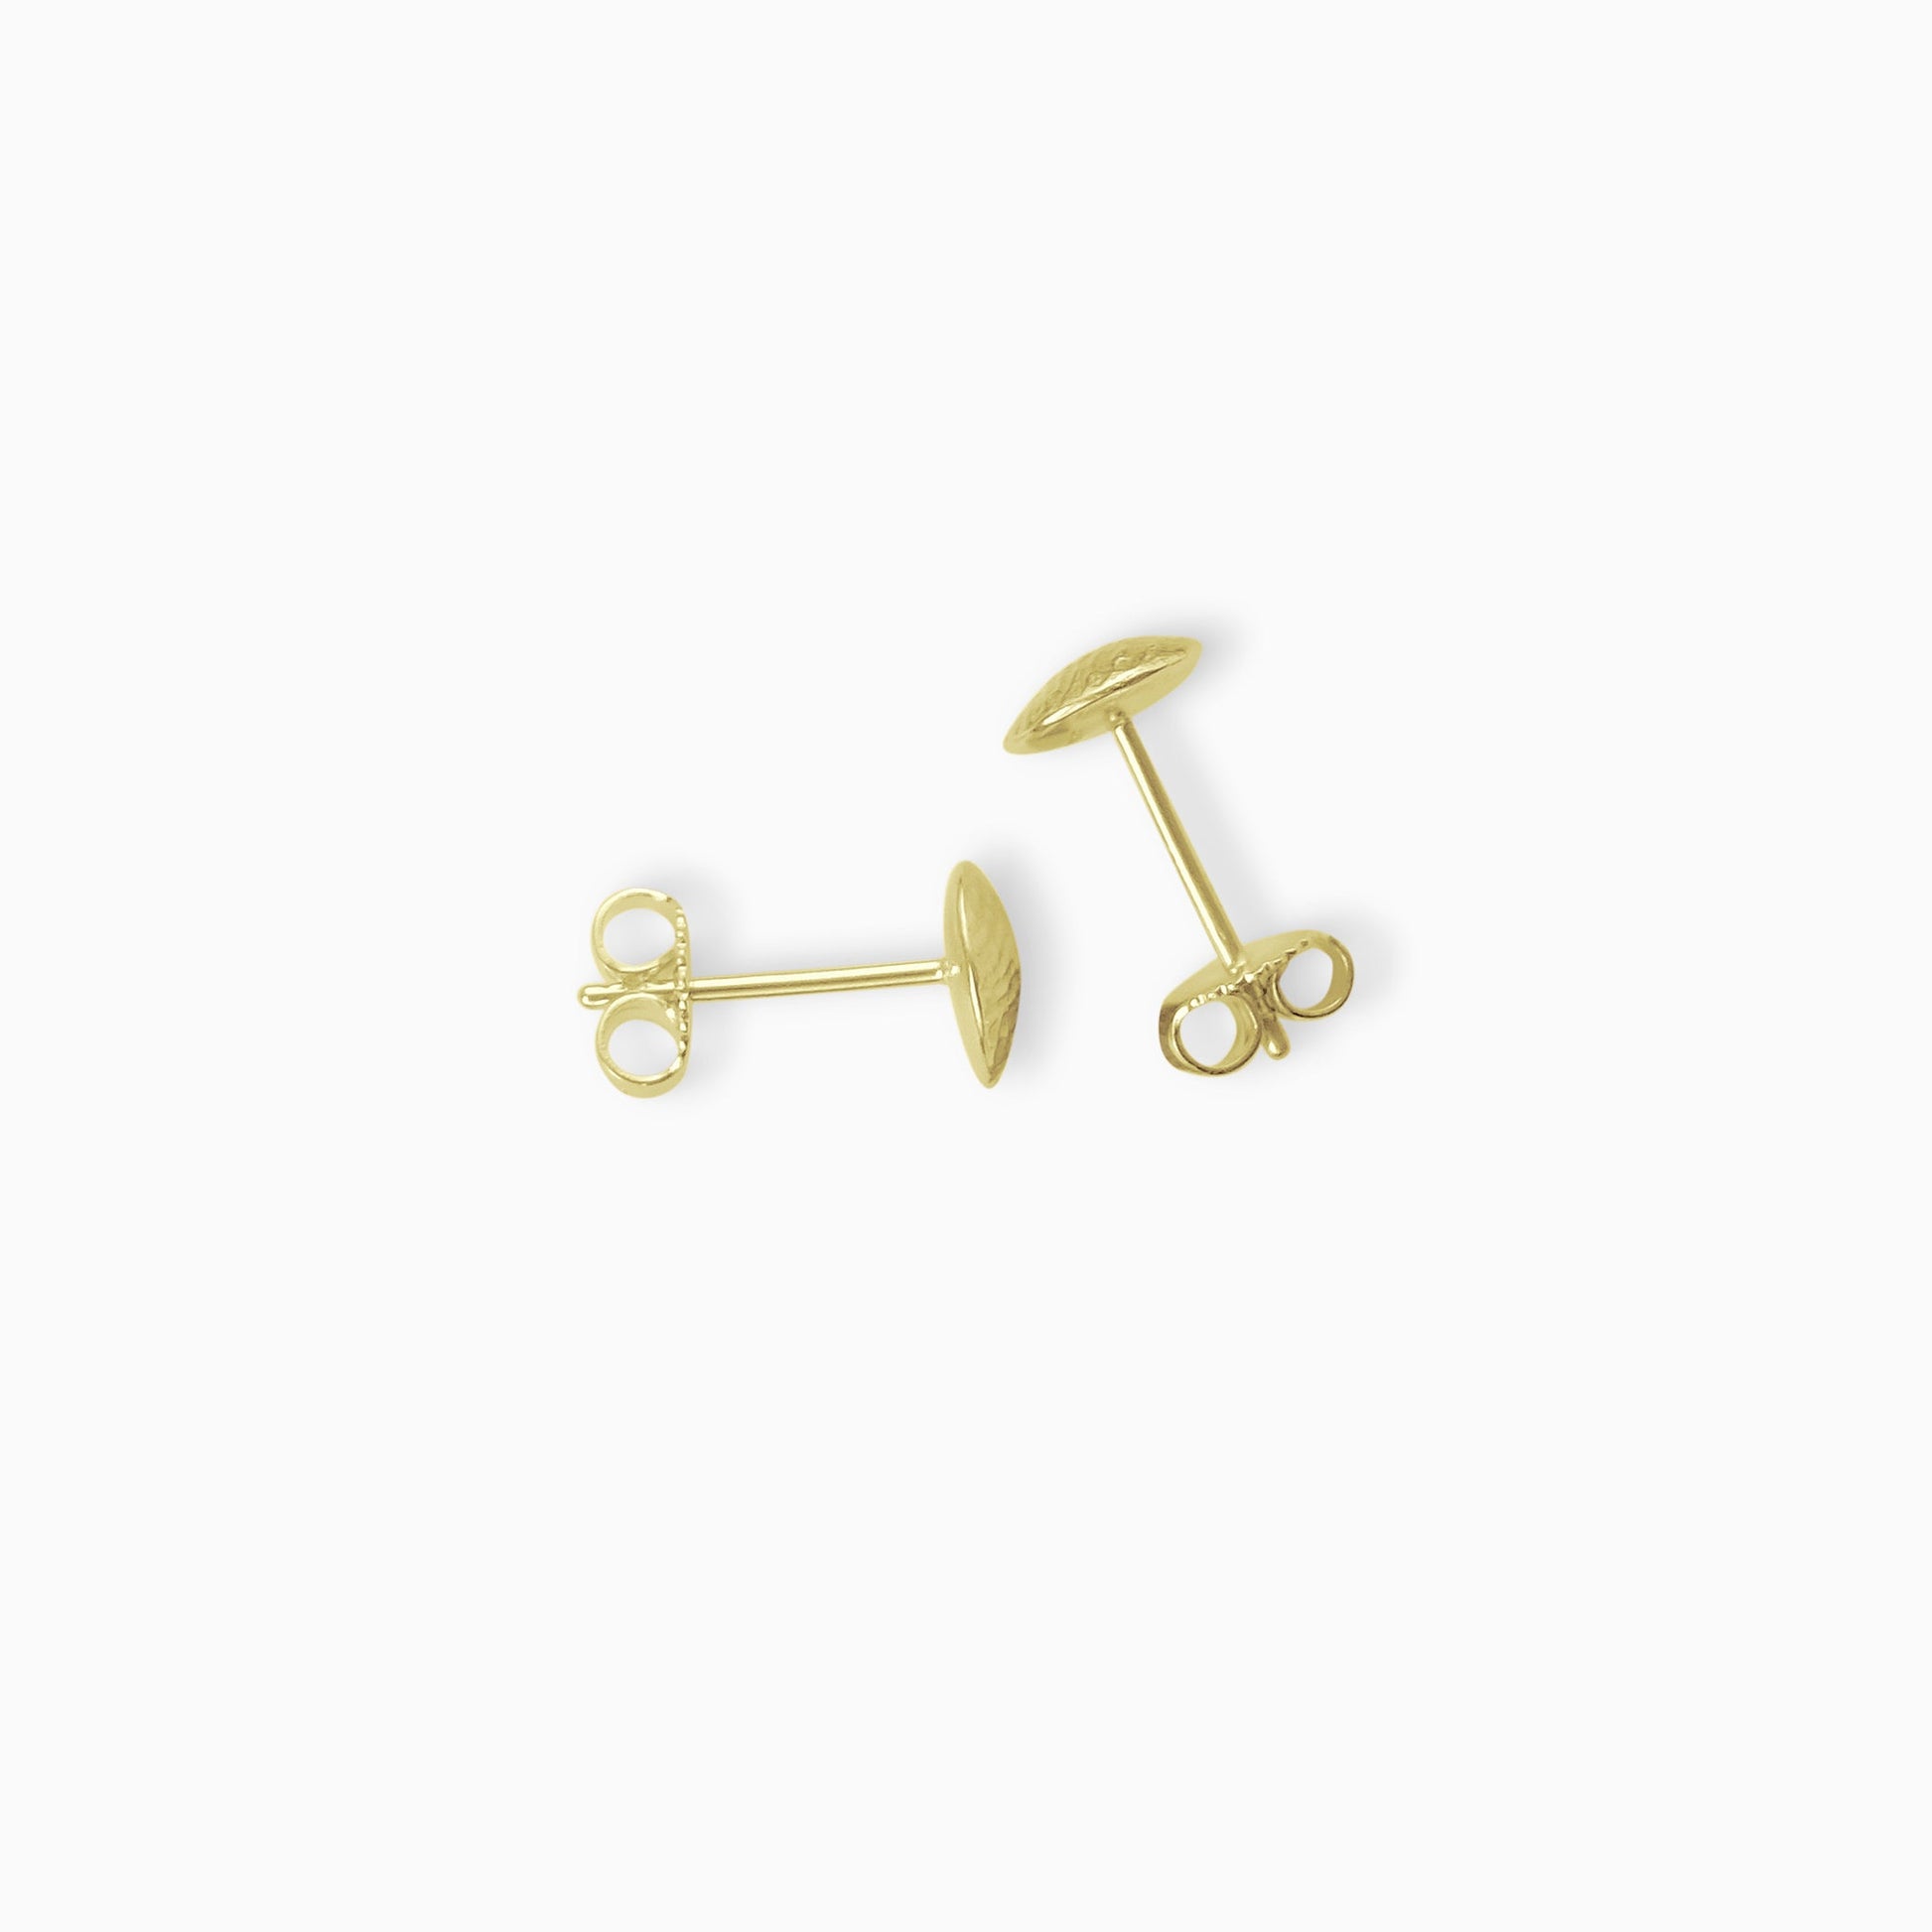 A pair of dainty 18ct Fairtrade yellow gold disc shaped stud earrings. A soft pattern of diagonal lines across a slightly domed surface. 7mm diameter.